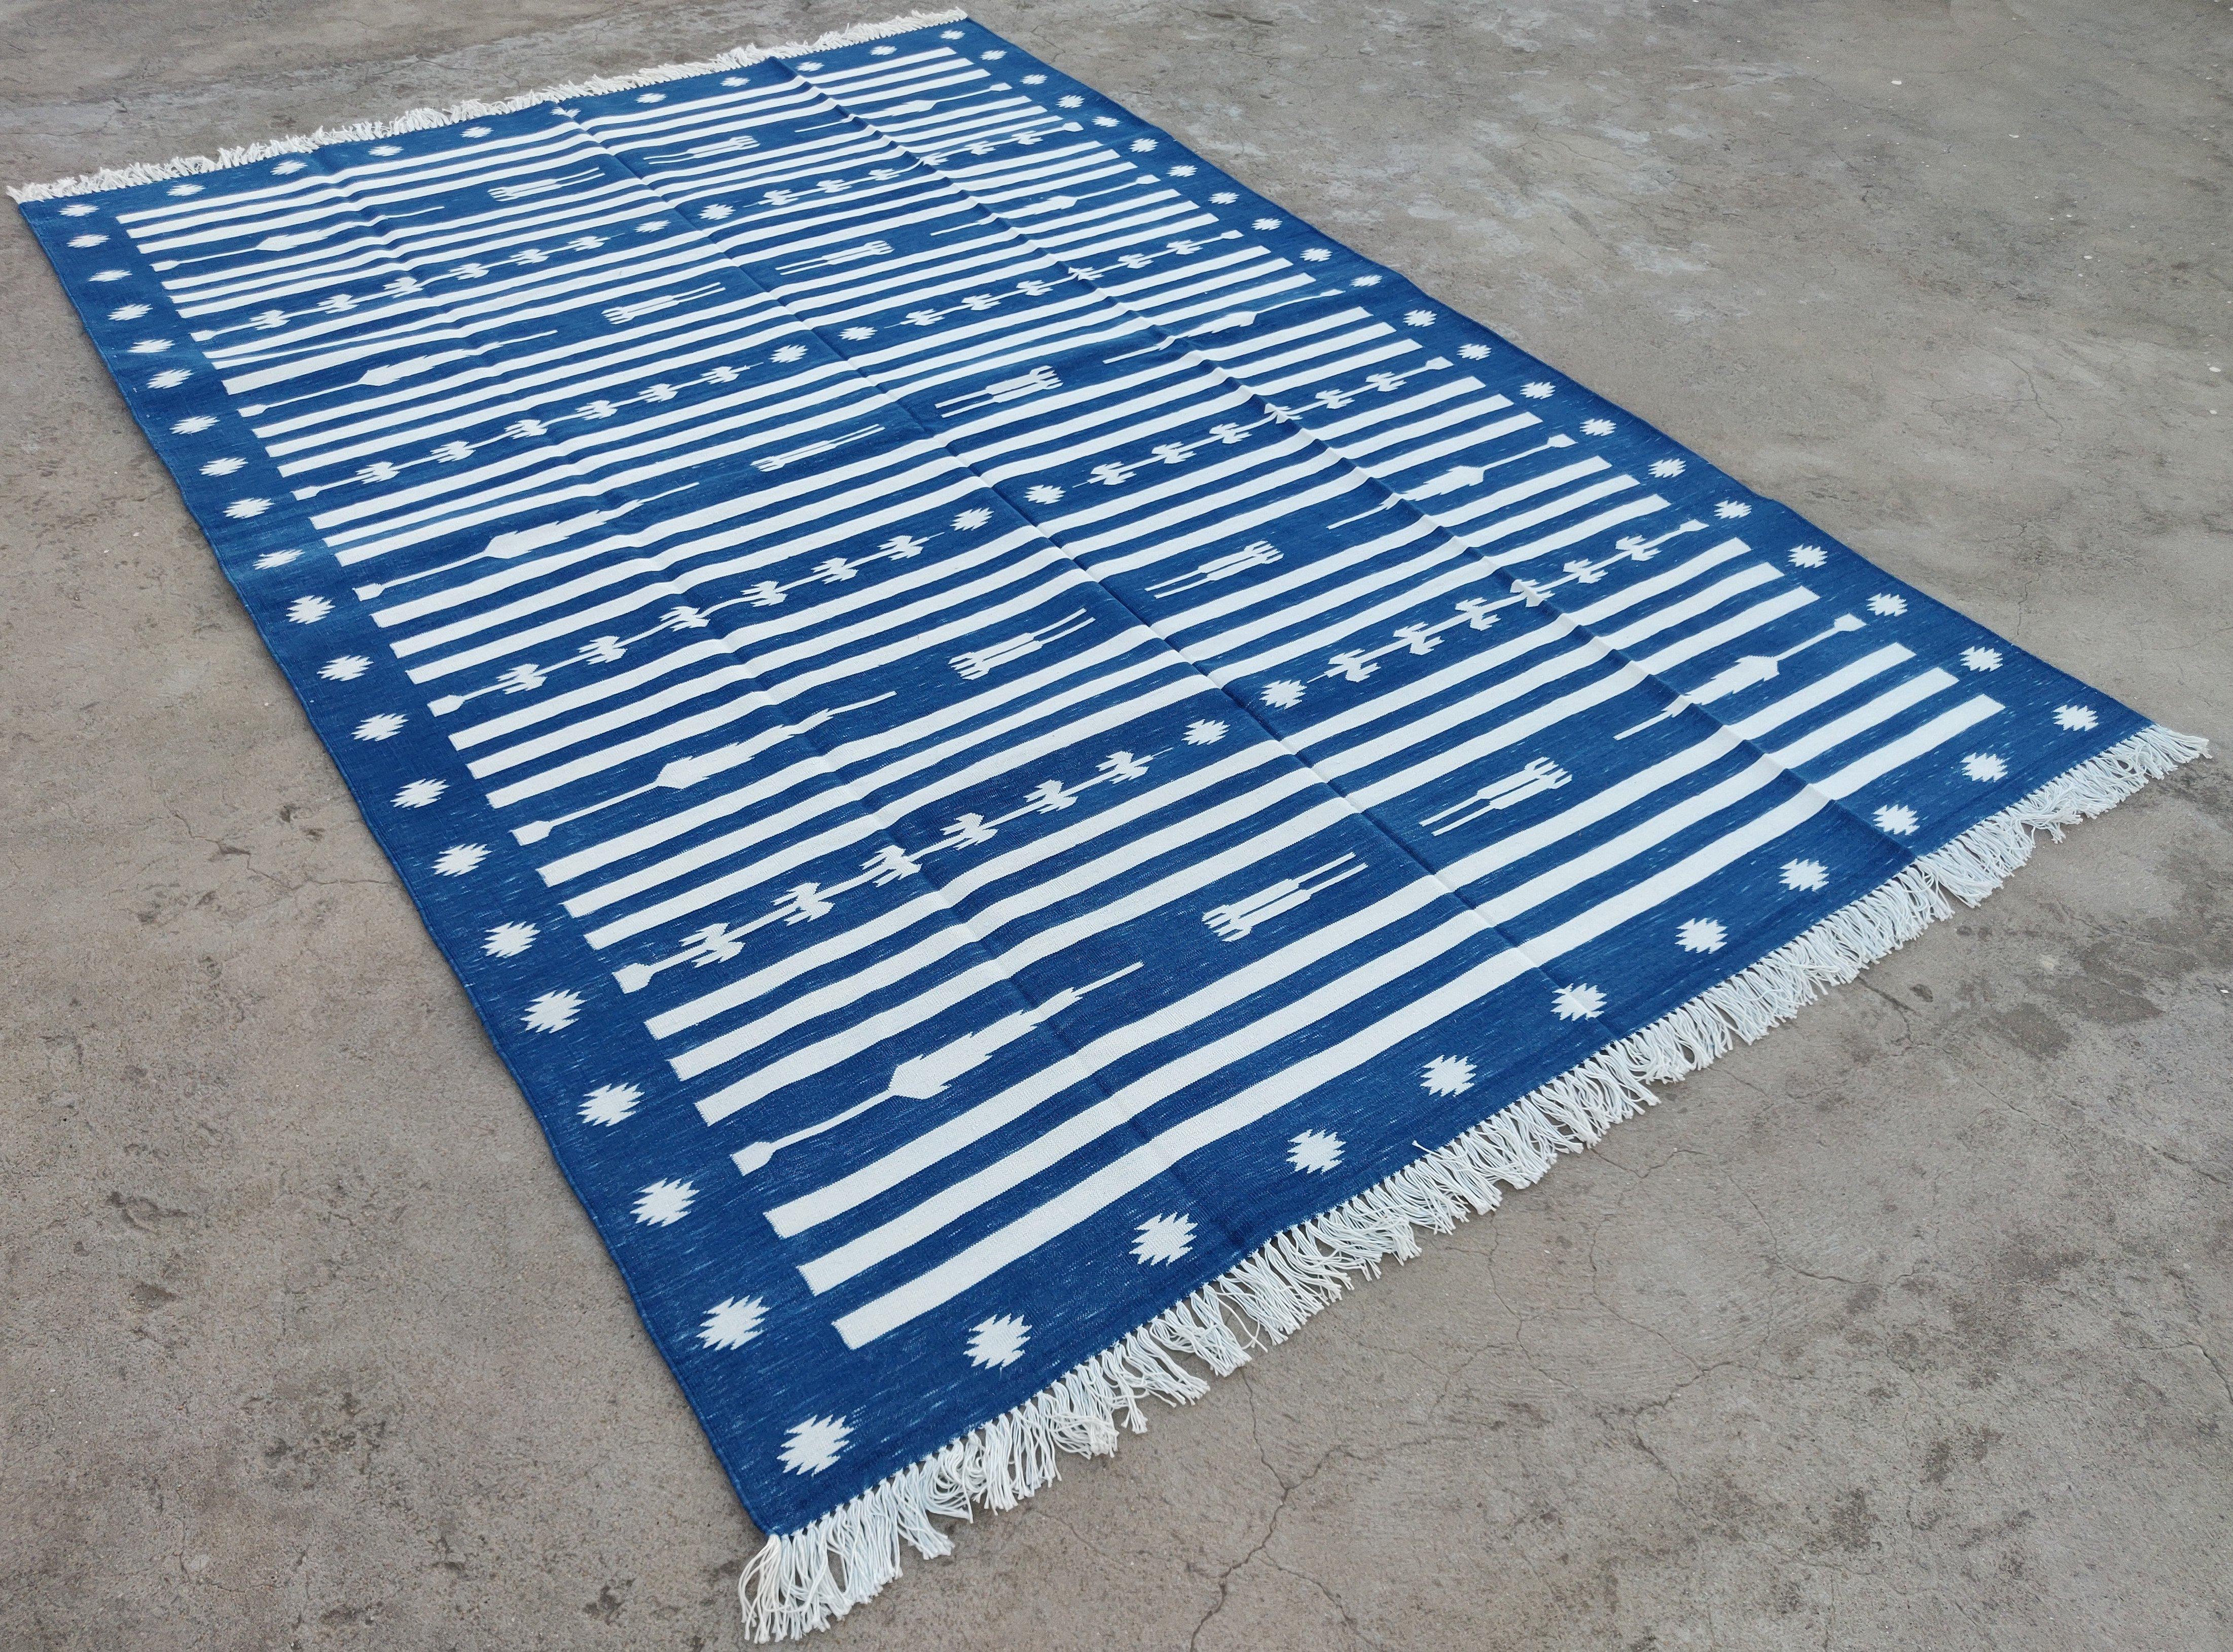 Cotton Vegetable Dyed Indigo Blue and White Striped Indian Dhurrie Rug-6'x9' 

These special flat-weave dhurries are hand-woven with 15 ply 100% cotton yarn. Due to the special manufacturing techniques used to create our rugs, the size and color of